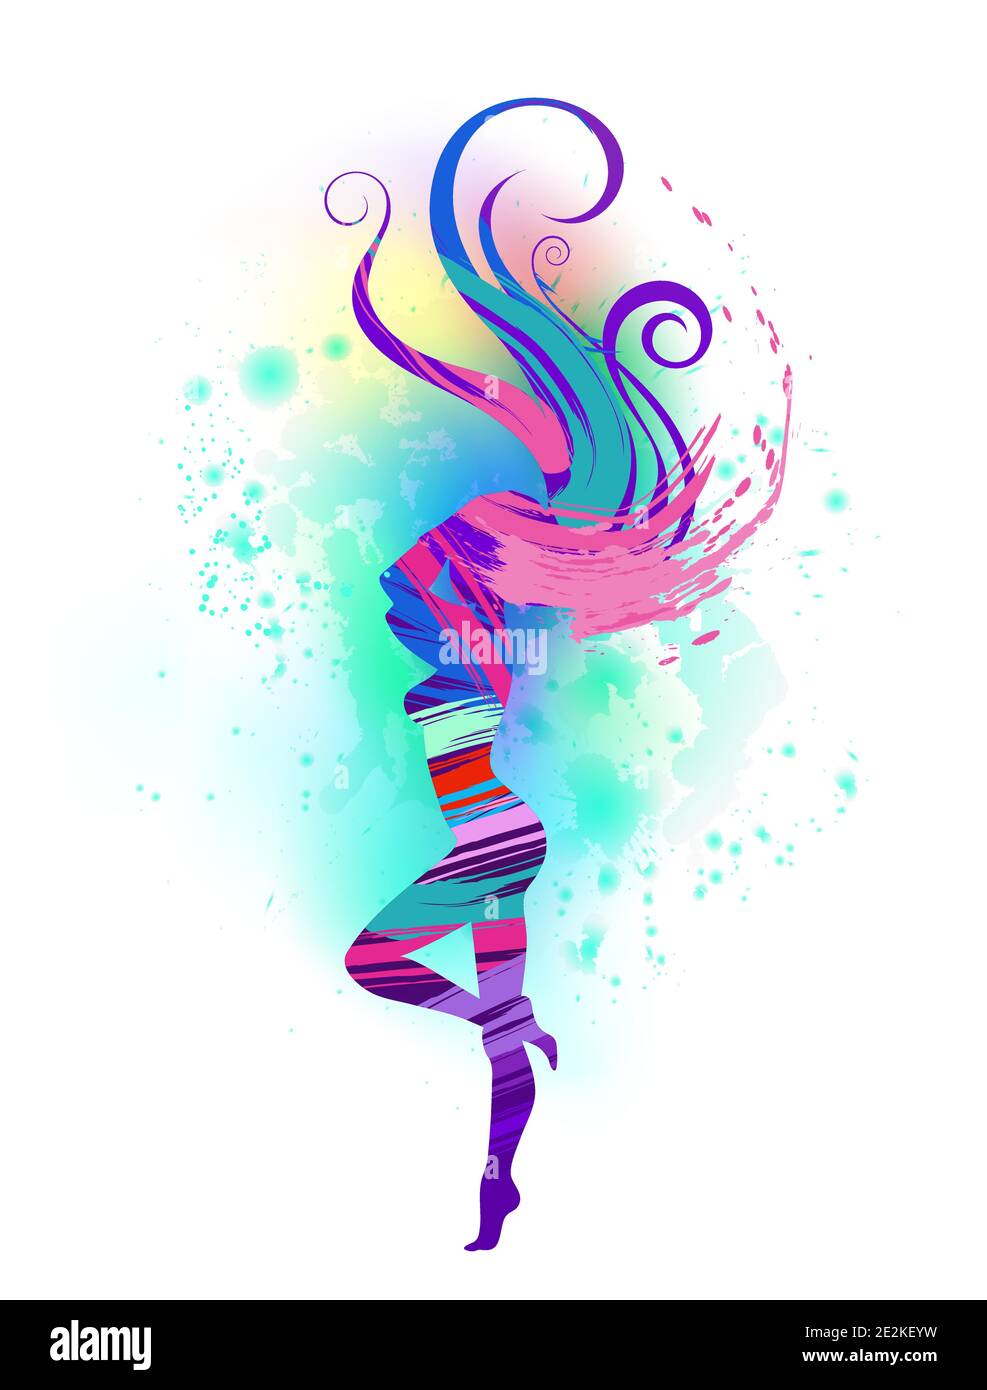 Dancing girl with long hair, painted with strokes of bright pink and purple paint on white background. Woman. Stock Vector